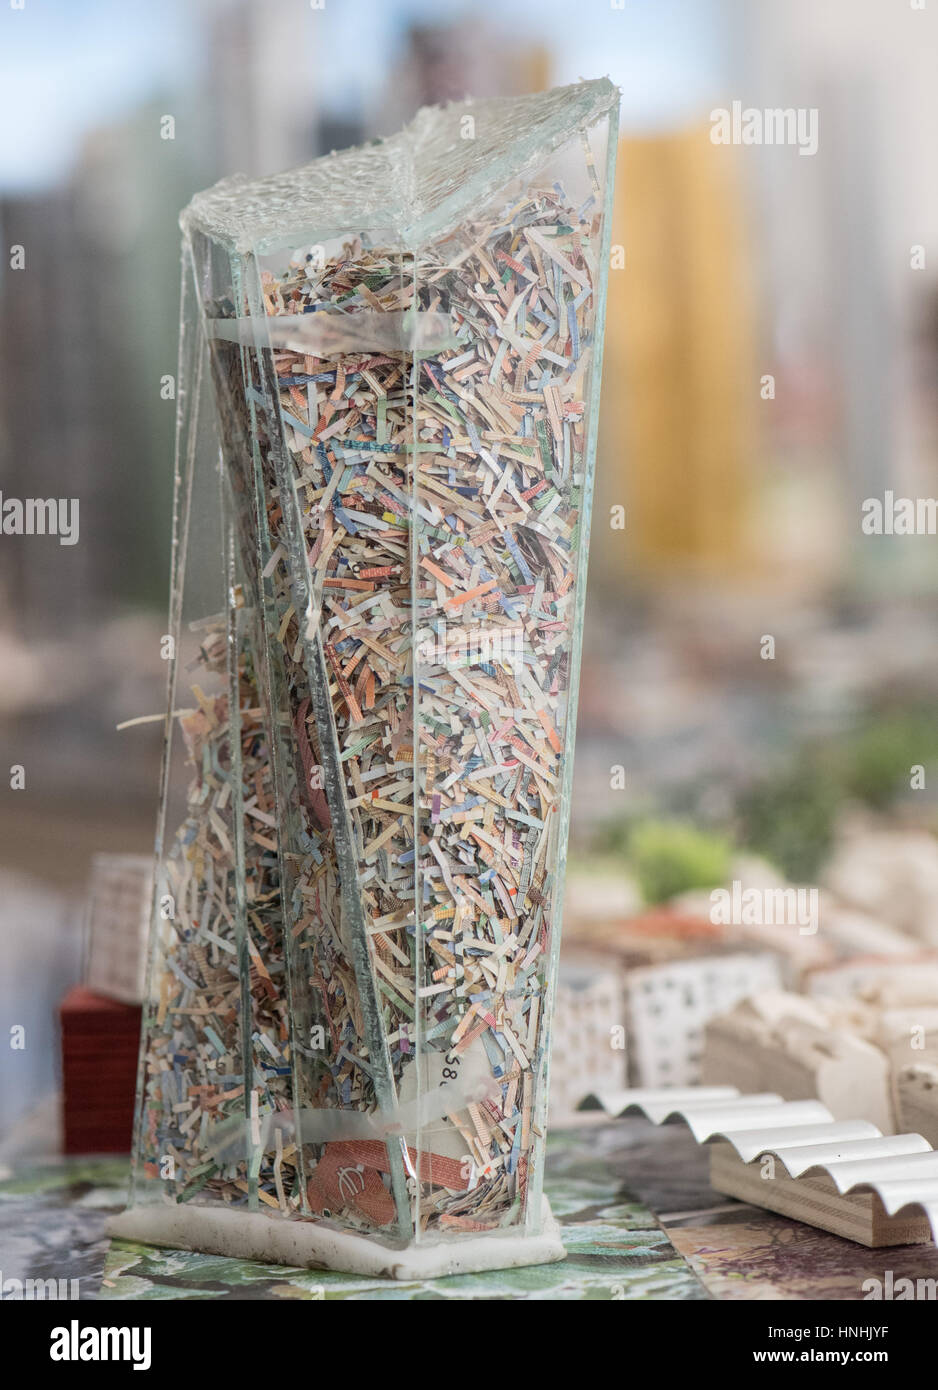 Frankfurt, Germany. 13th Feb, 2017. The plexi glas reconstruction of the European Central Bank is filled with shredded bank notes in the new model of the city of Frankfurt, Germany, 13 February 2017. The skyline of the other banking highrises can be seen in the background. The 70 squaremetres large model of the Dutch artist Hermann Helle can be viewed in the Museum of History starting in October in Frankfurt. Photo: Boris Roessler/dpa/Alamy Live News Stock Photo